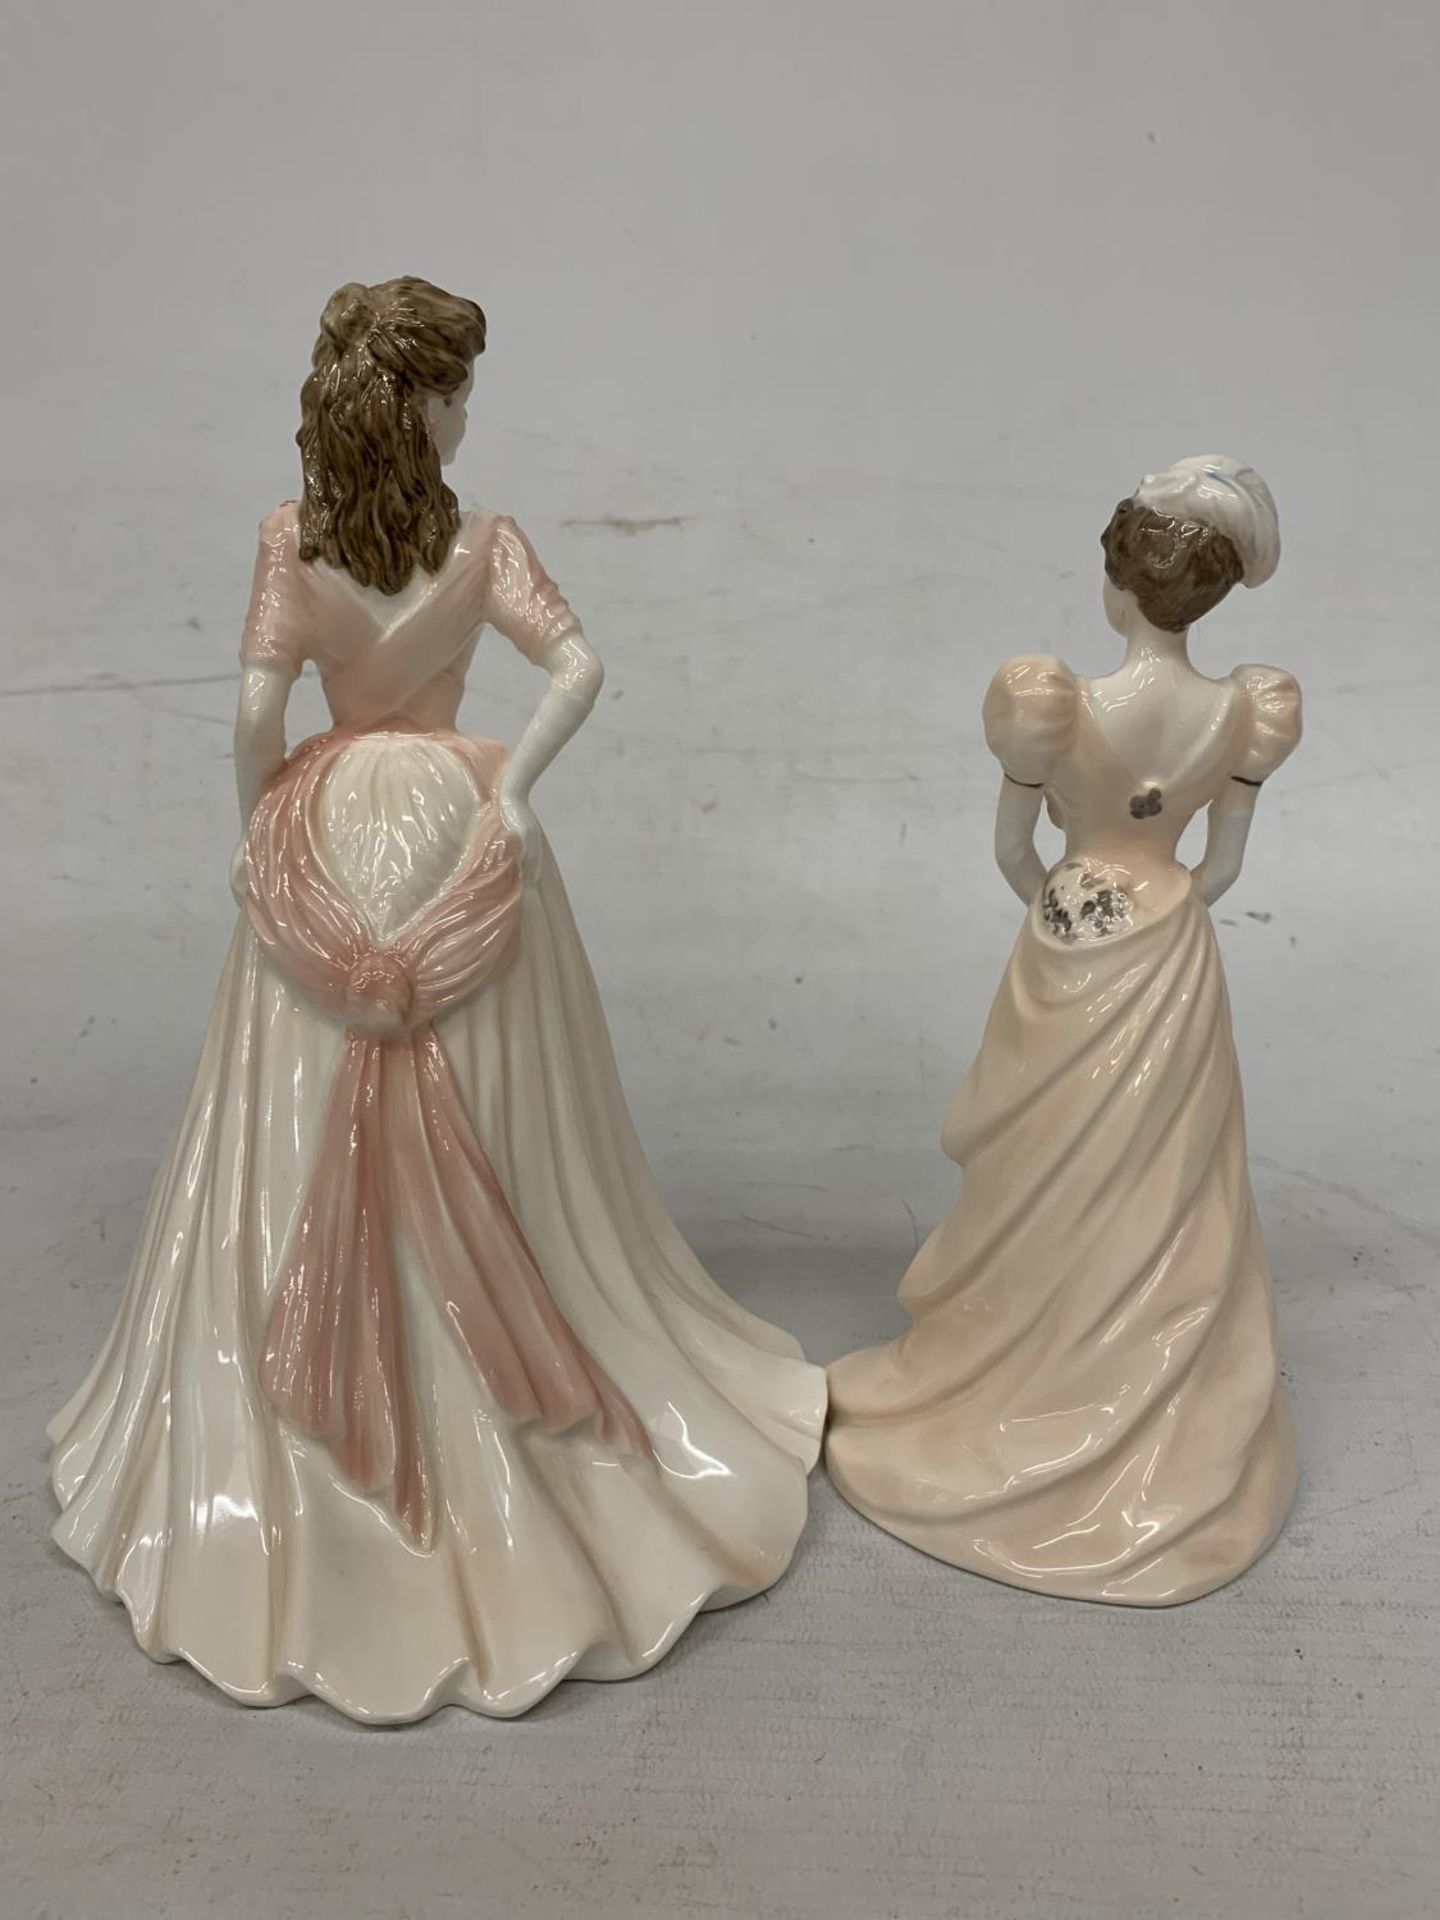 TWO COALPORT FIGURES - CHANTILLY LACE "VELVET" AND JACQUELINE FROM THE LADIES OF FASHION - Image 3 of 5